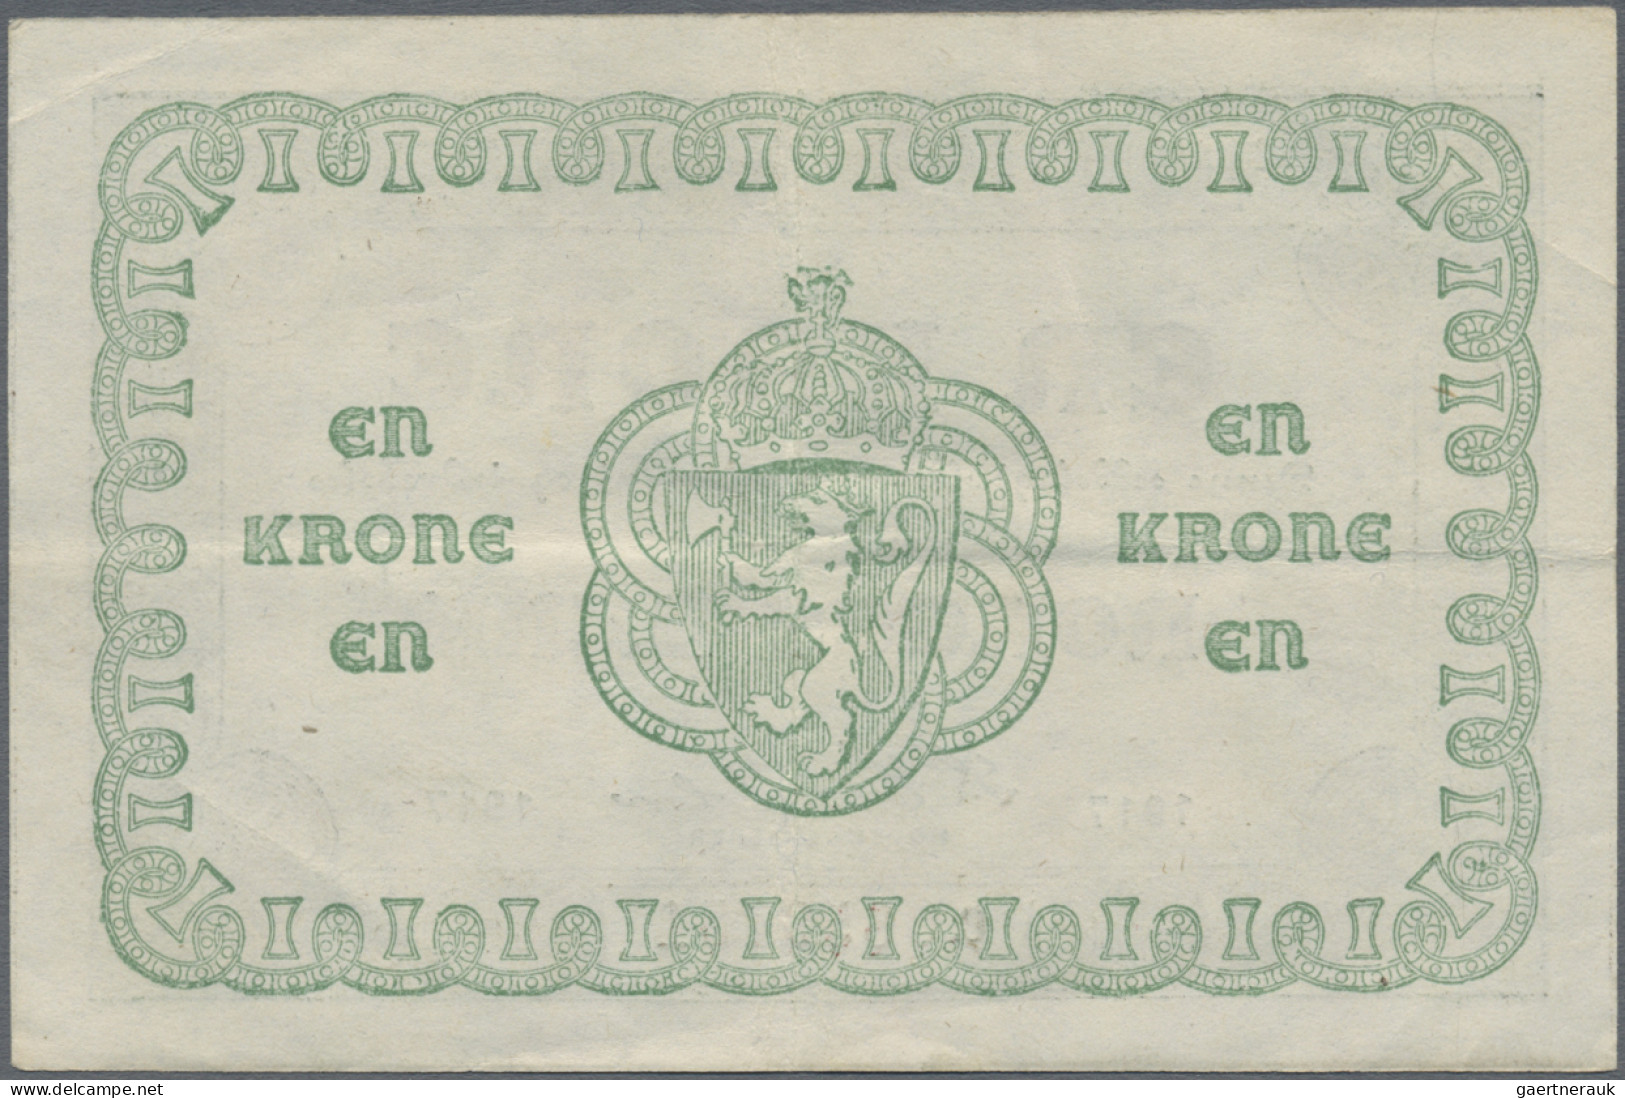 Norway: Norges Bank, lot with 7 banknotes, 1917-1967 series, with 2x 1, 2x 2, 5